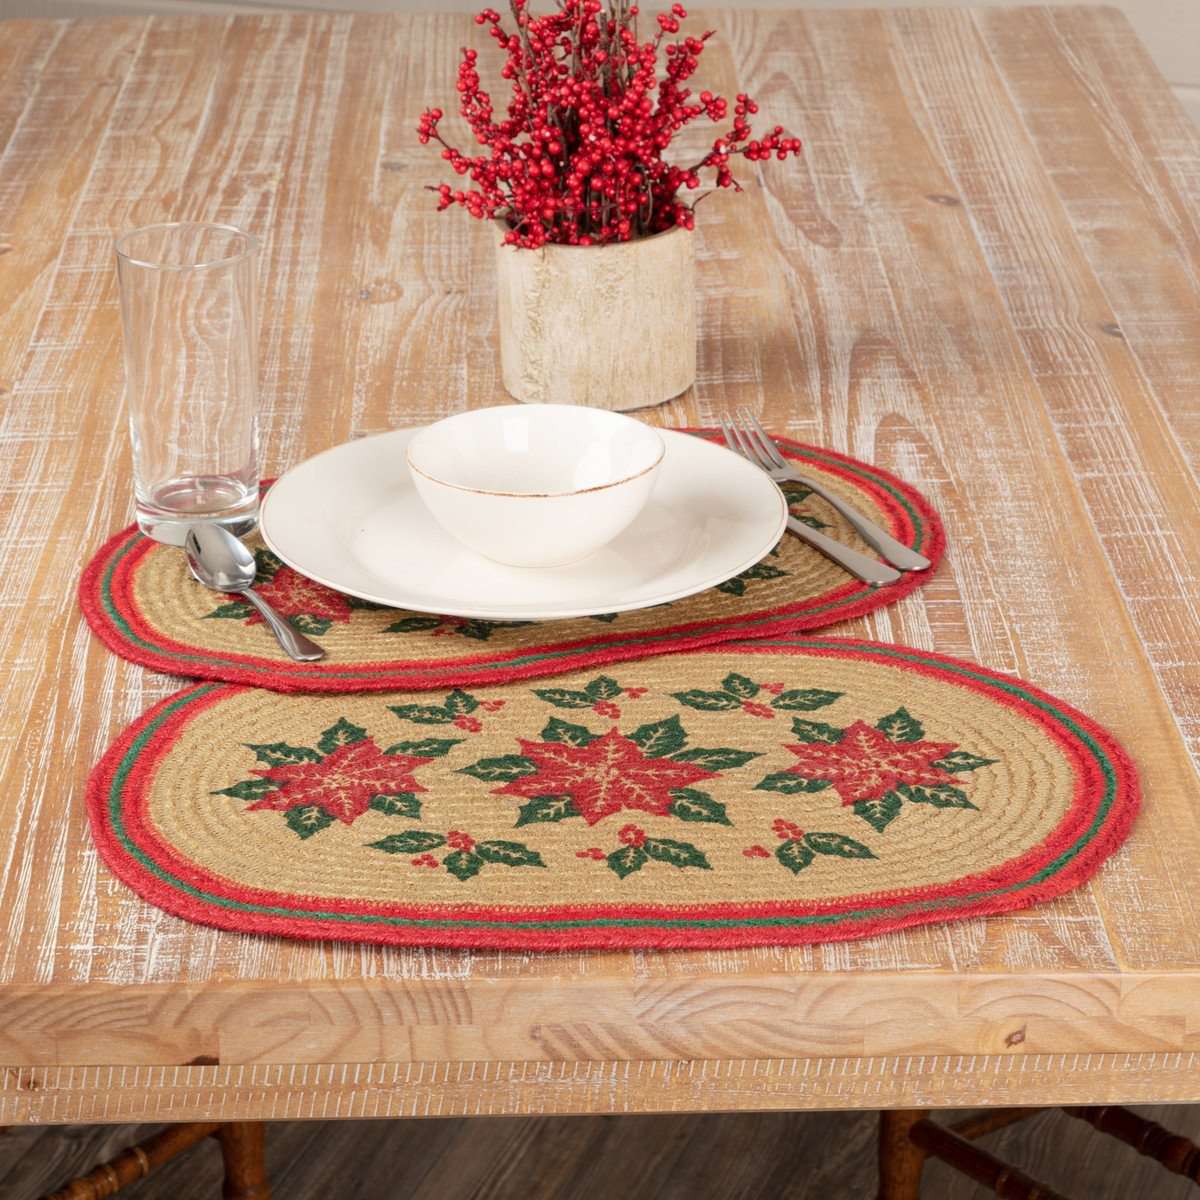 Poinsettia Jute Braided Placemat Set of 6 VHC Brands - The Fox Decor